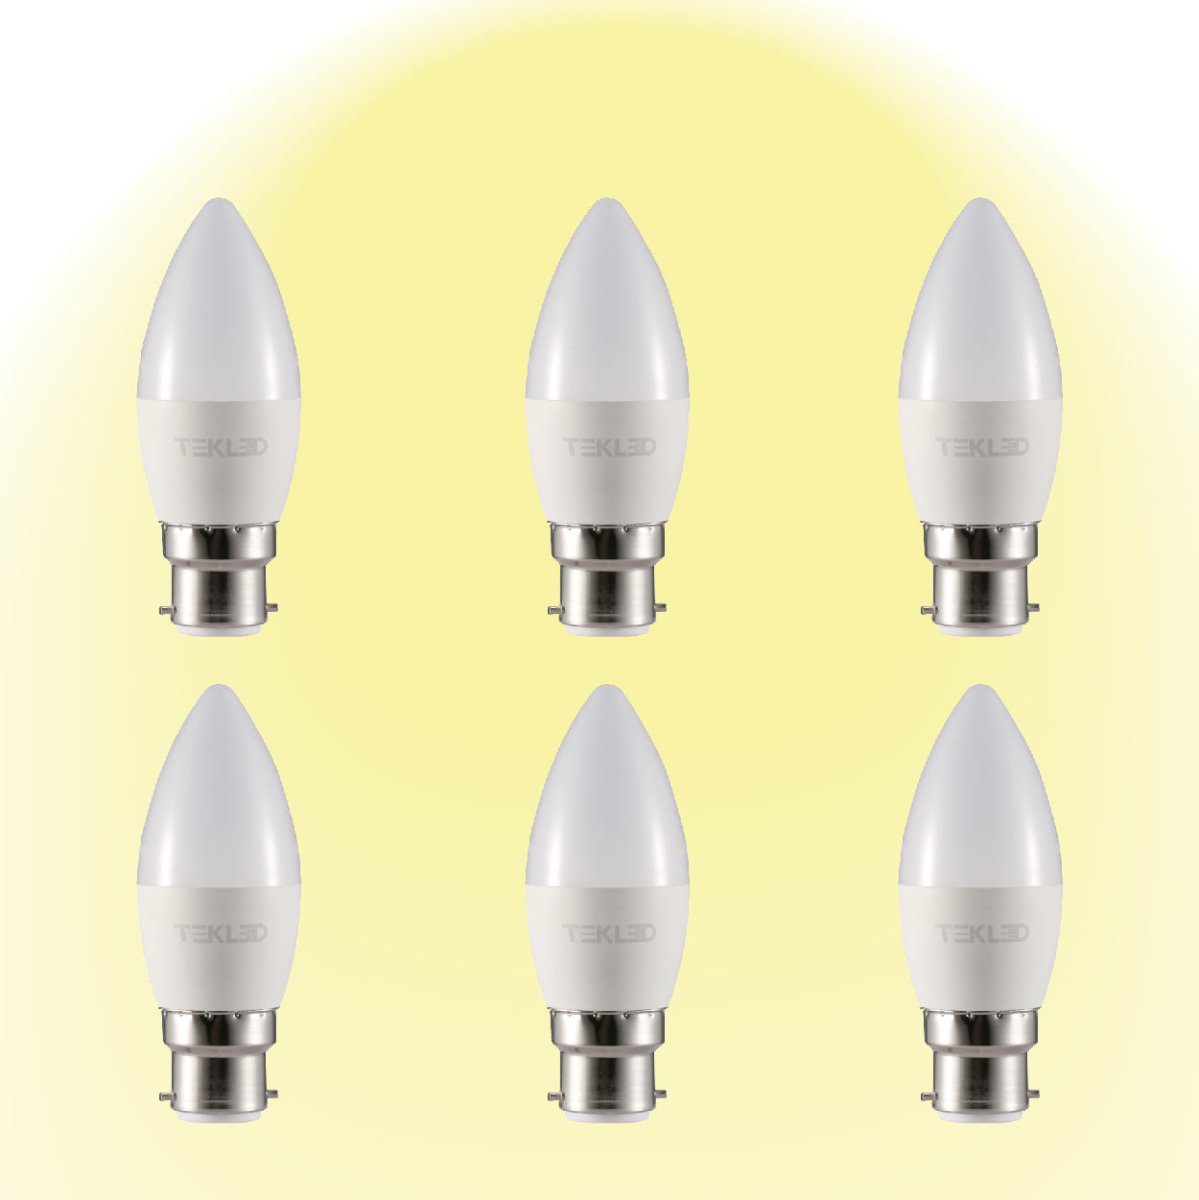 Cetus LED Candle Bulb C37 Dimmable B22 Bayonet Cap 6W Pack of 6 2700k warm white